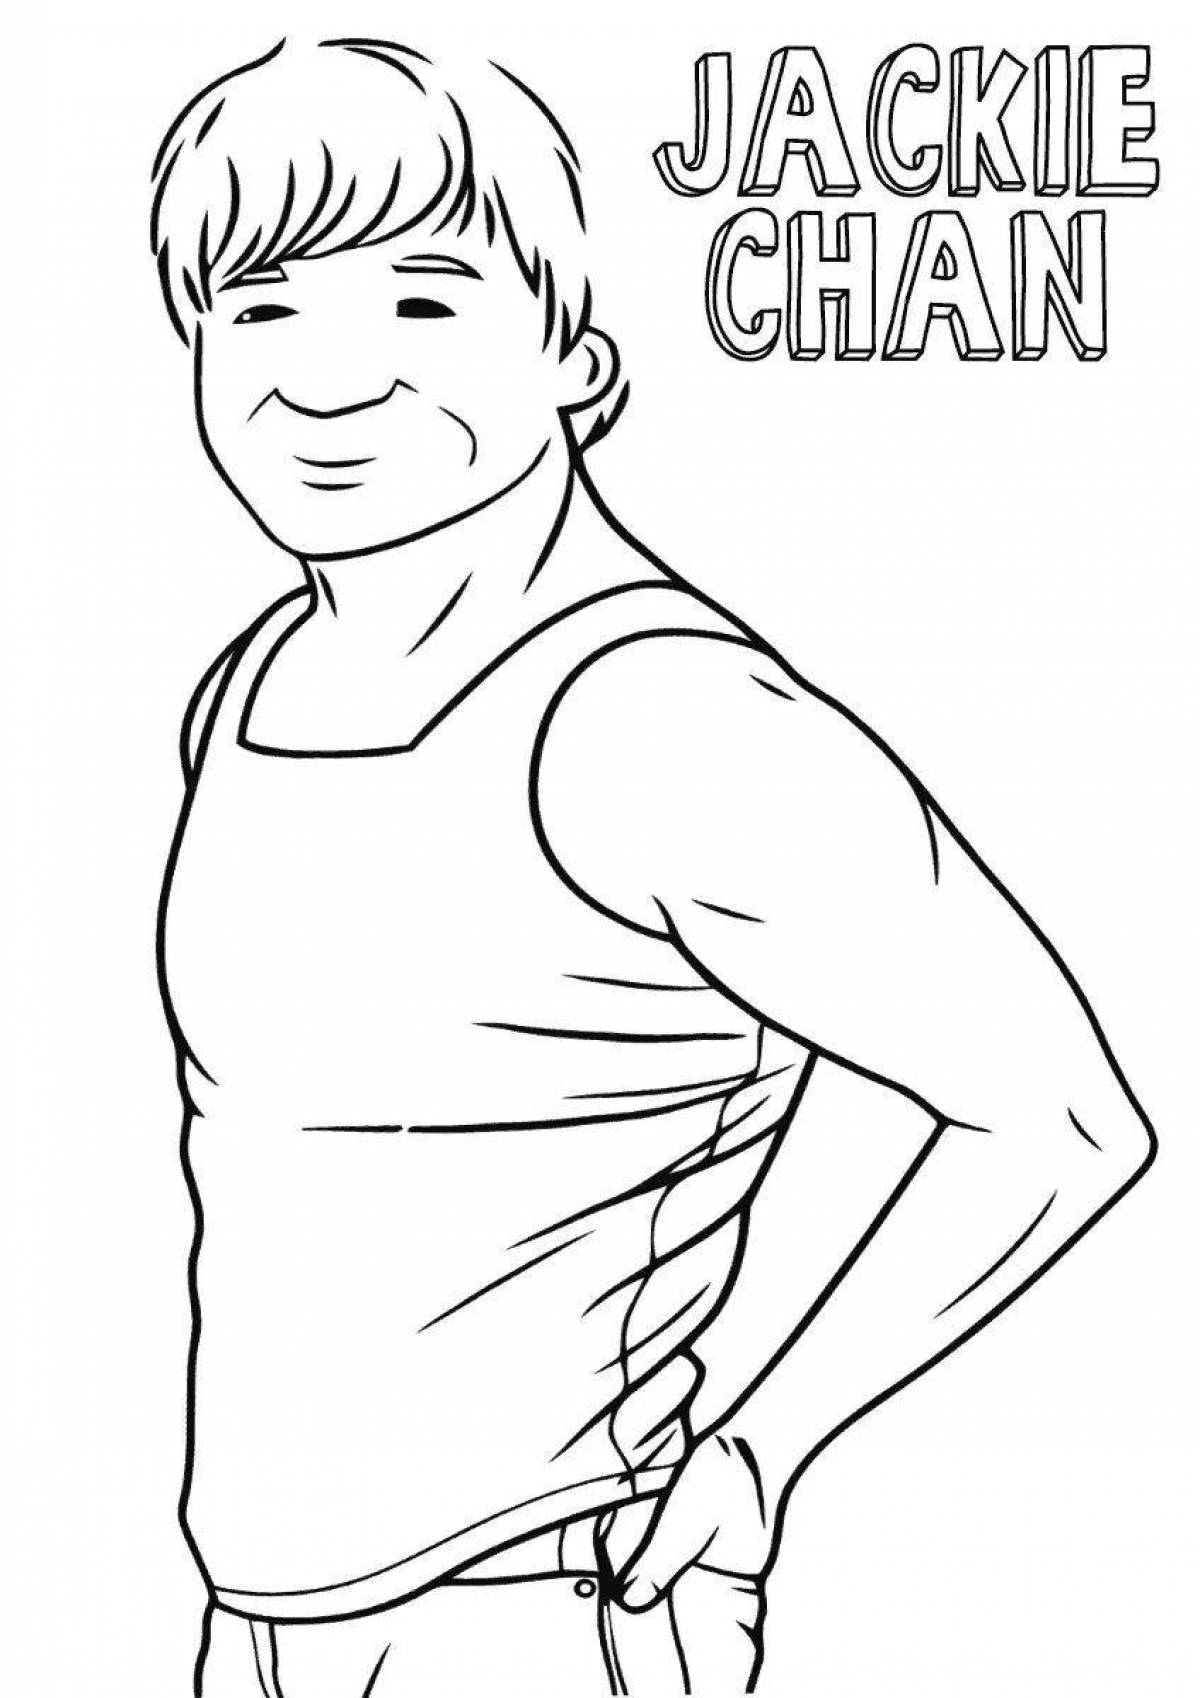 Coloring playful jackie chan